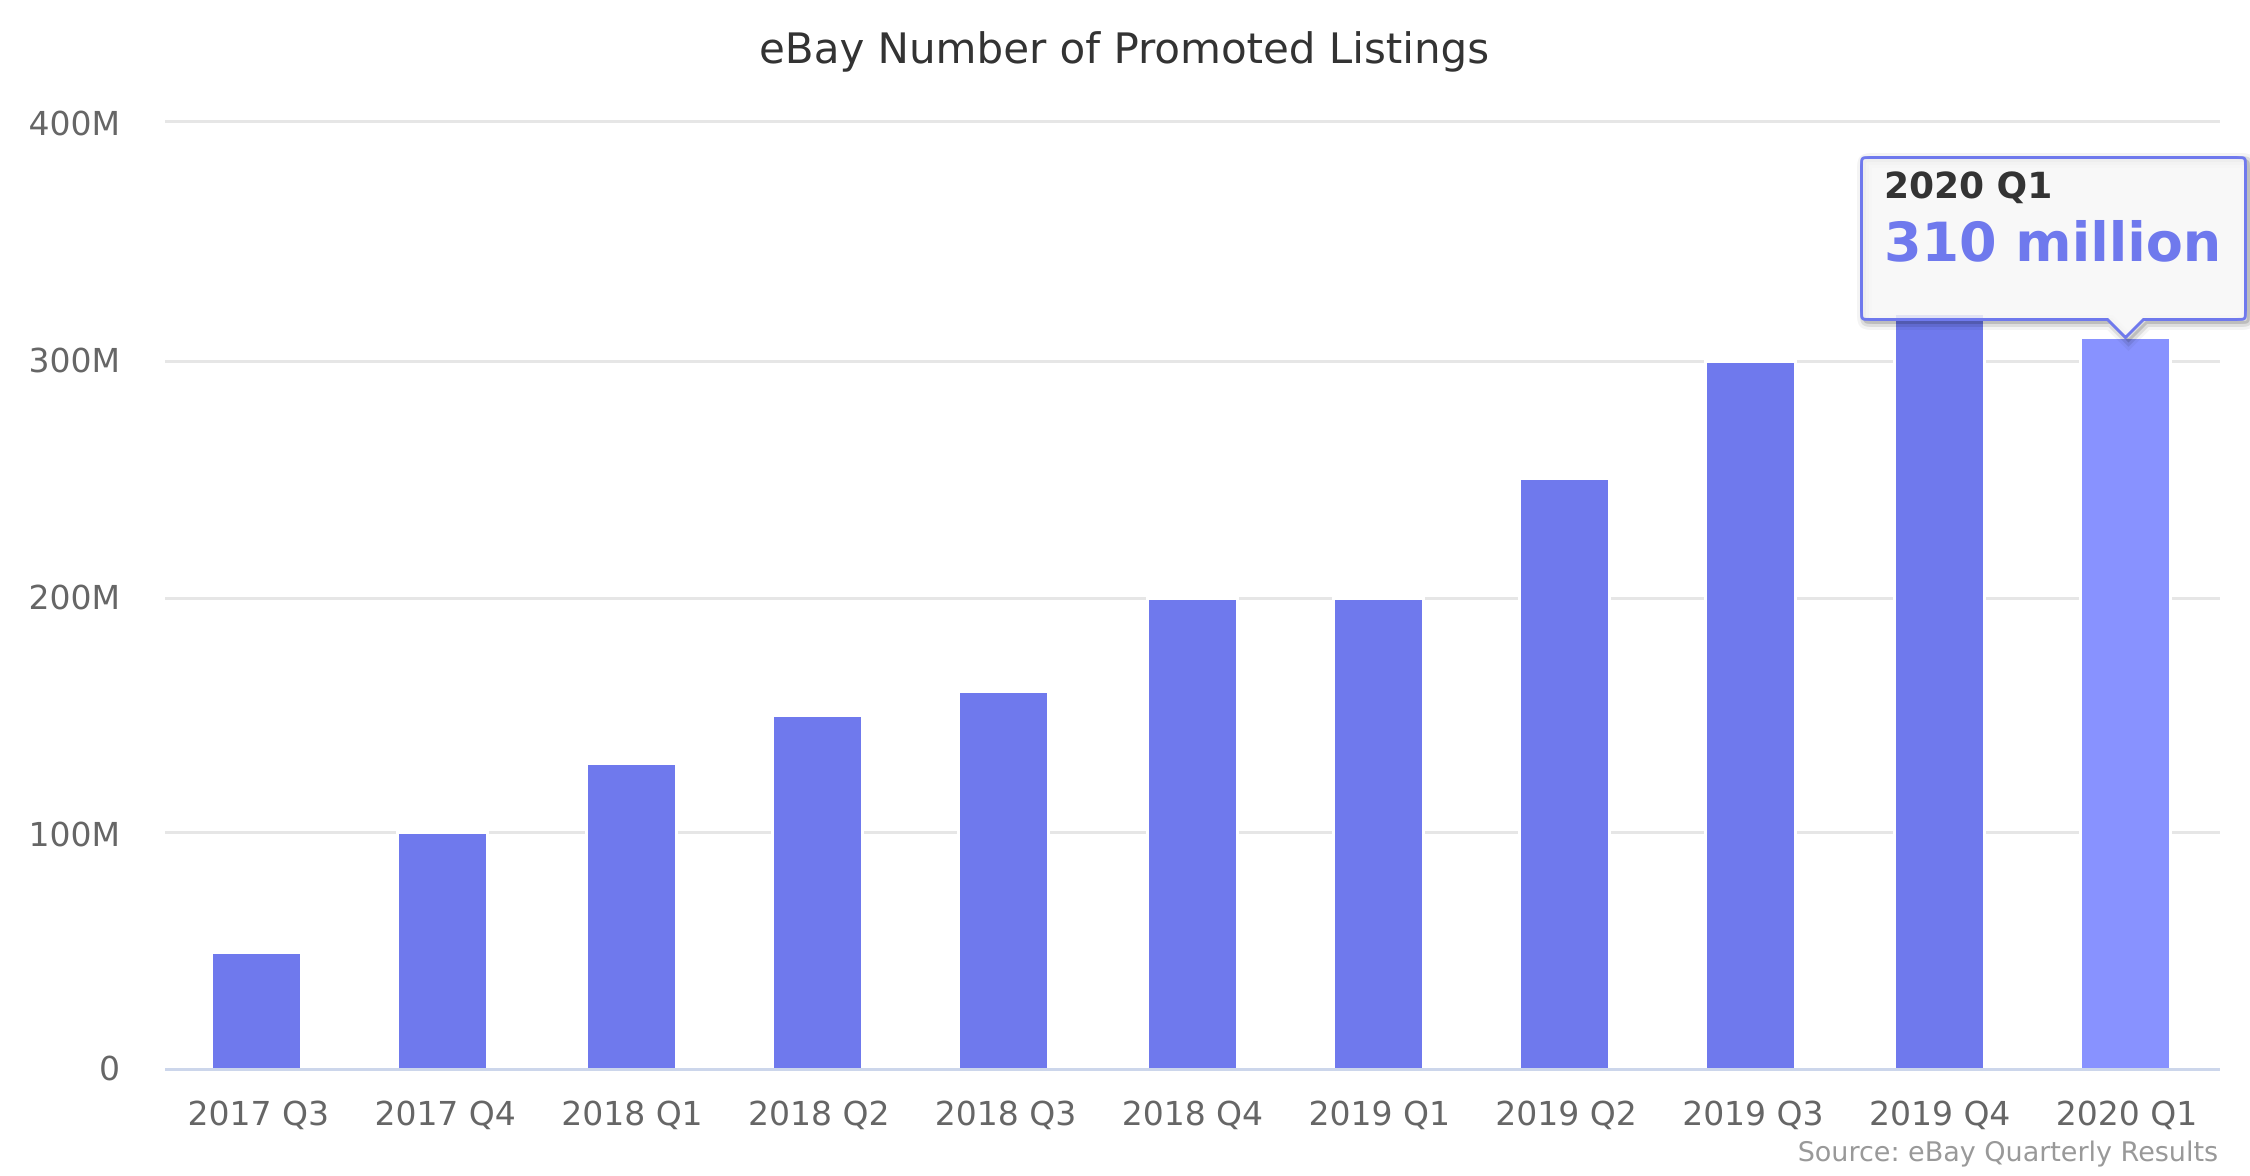 eBay Number of Promoted Listings 2017-2020